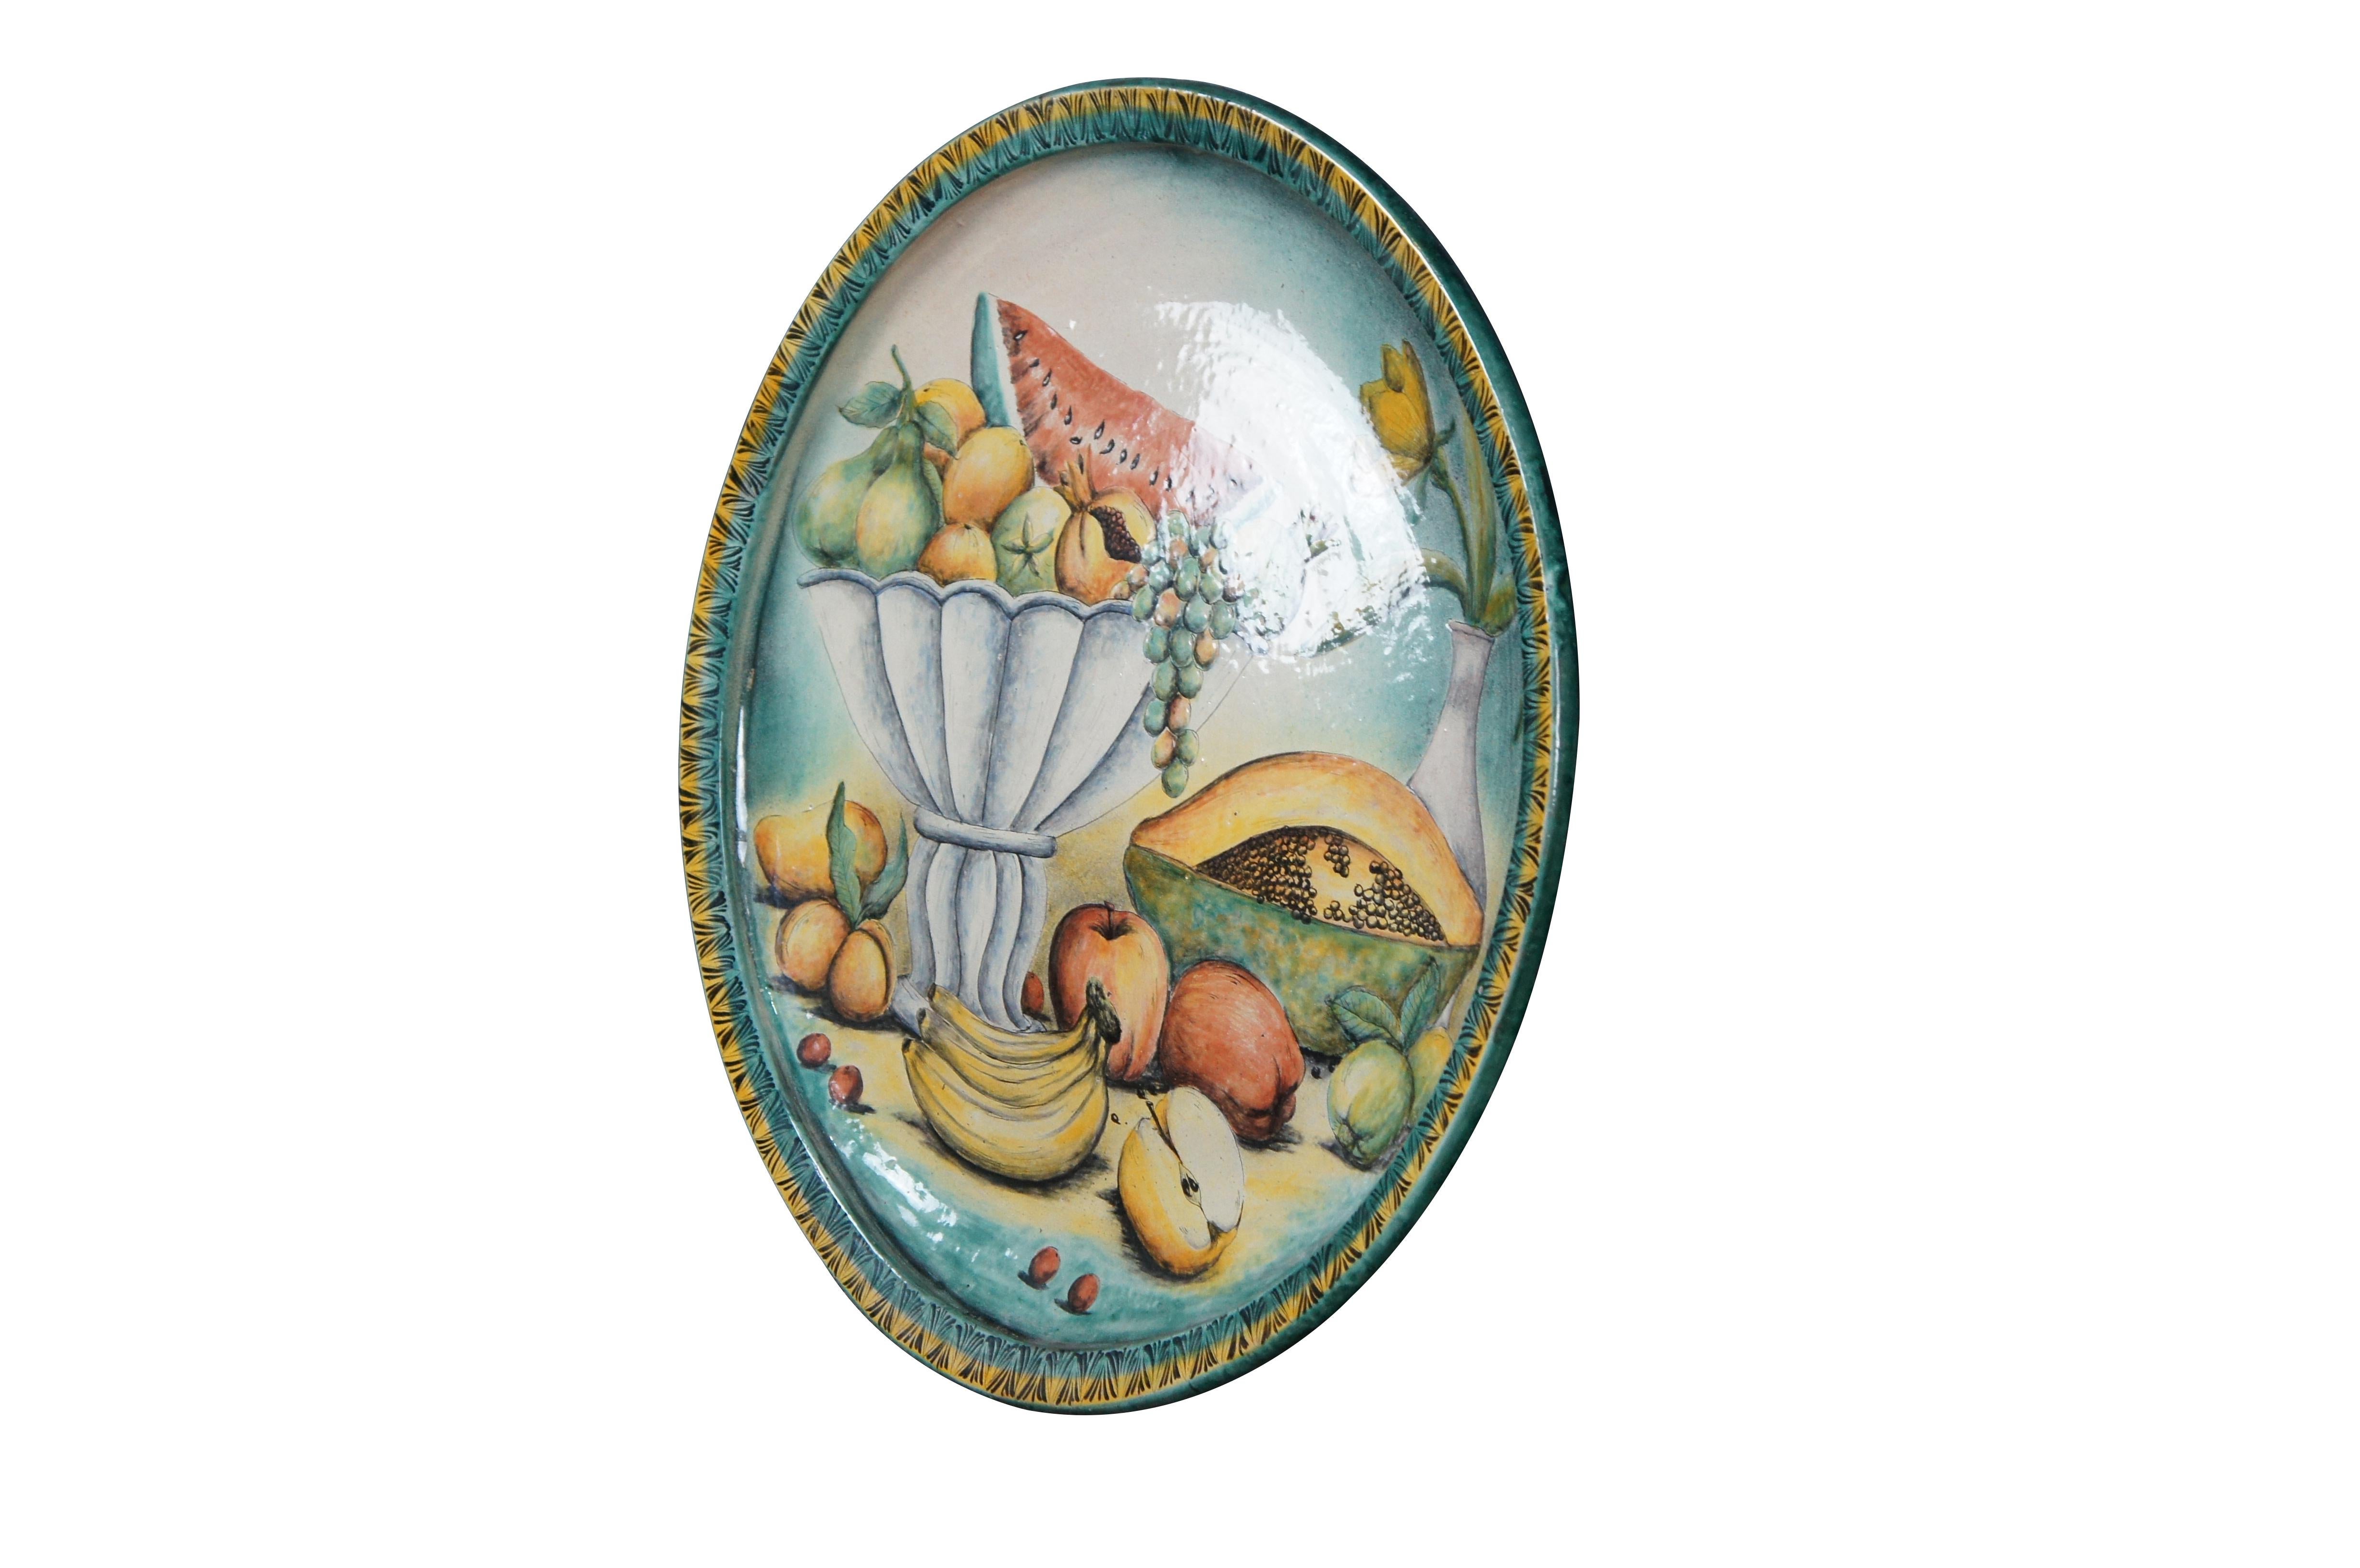 A beautiful 20th century Majolica Platter / Decorative Wall Plate. Made in Santa Rosa de Lima (Villagrán), Guanajuato. Features a hand painted still life of a compote with pears, grapefruit and a watermelon. A papaya, apples, bananas and more fruit